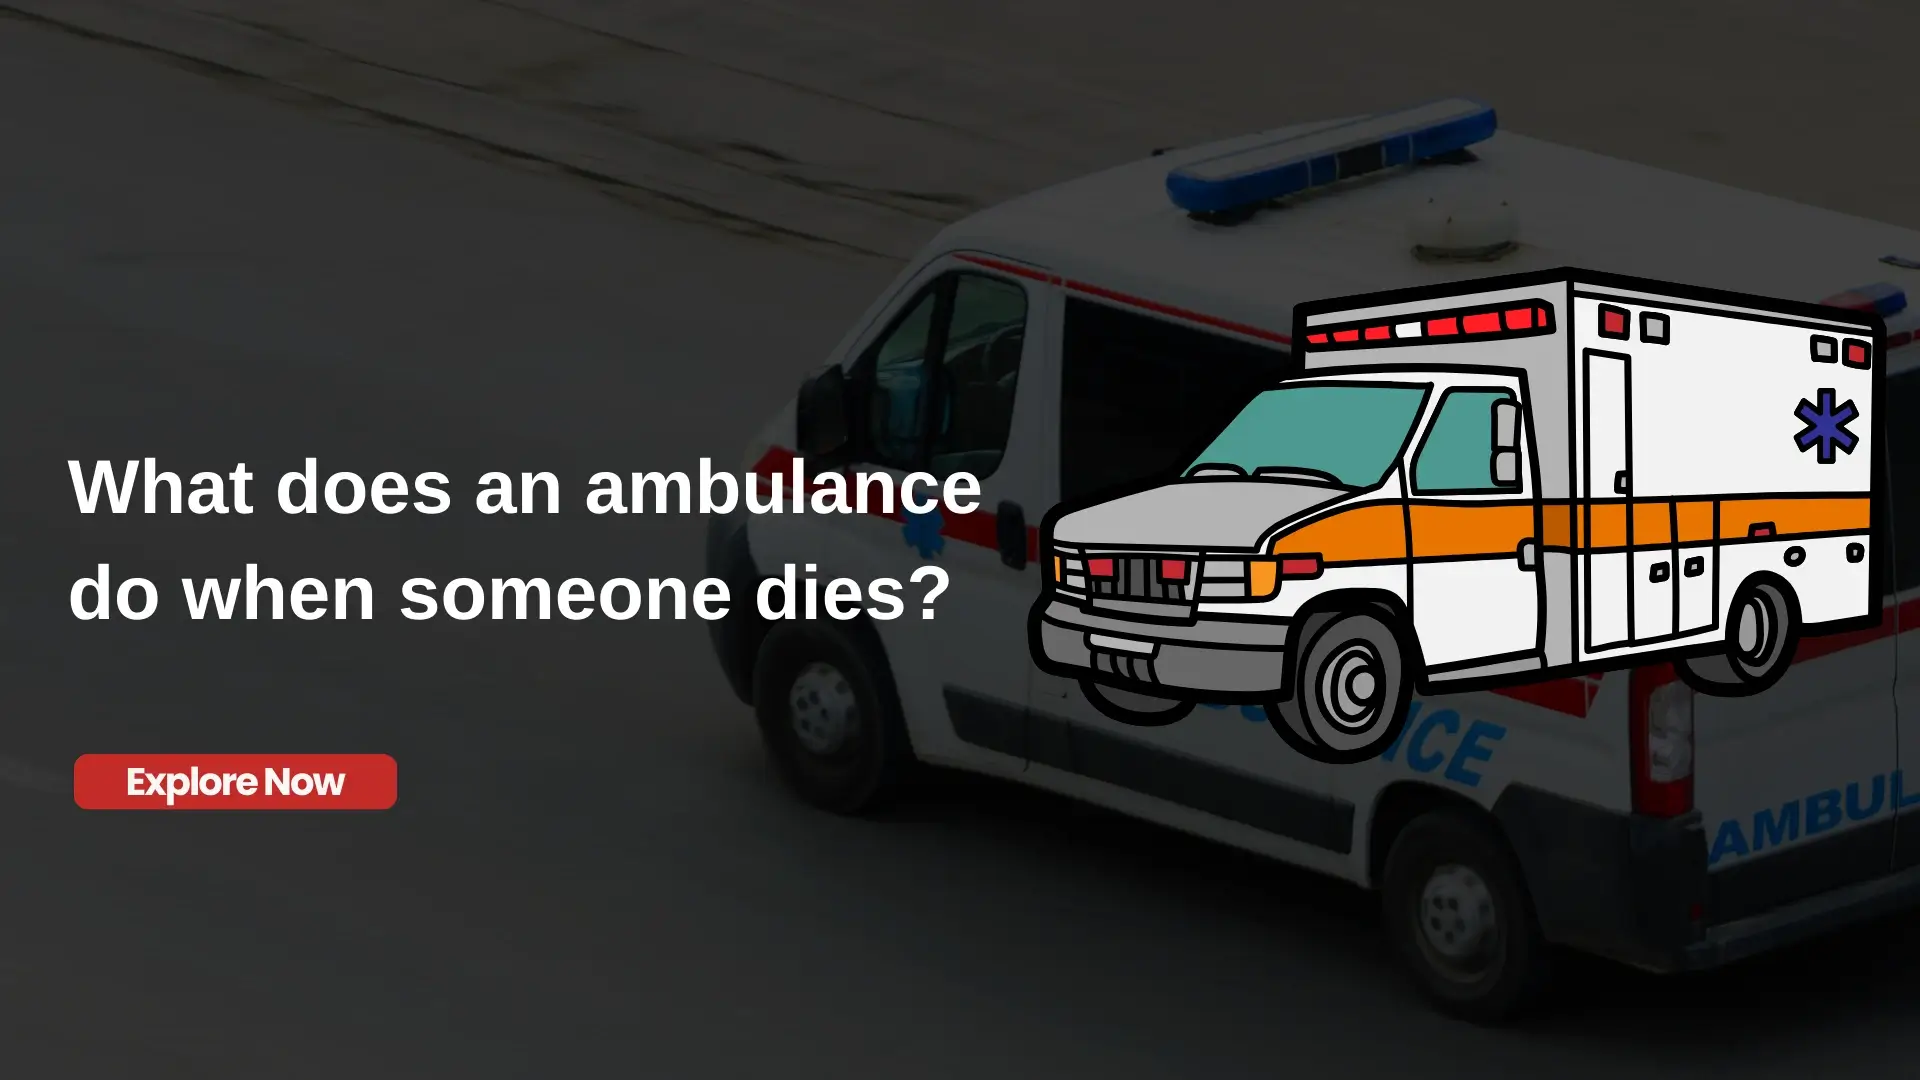 What does an ambulance do when someone dies